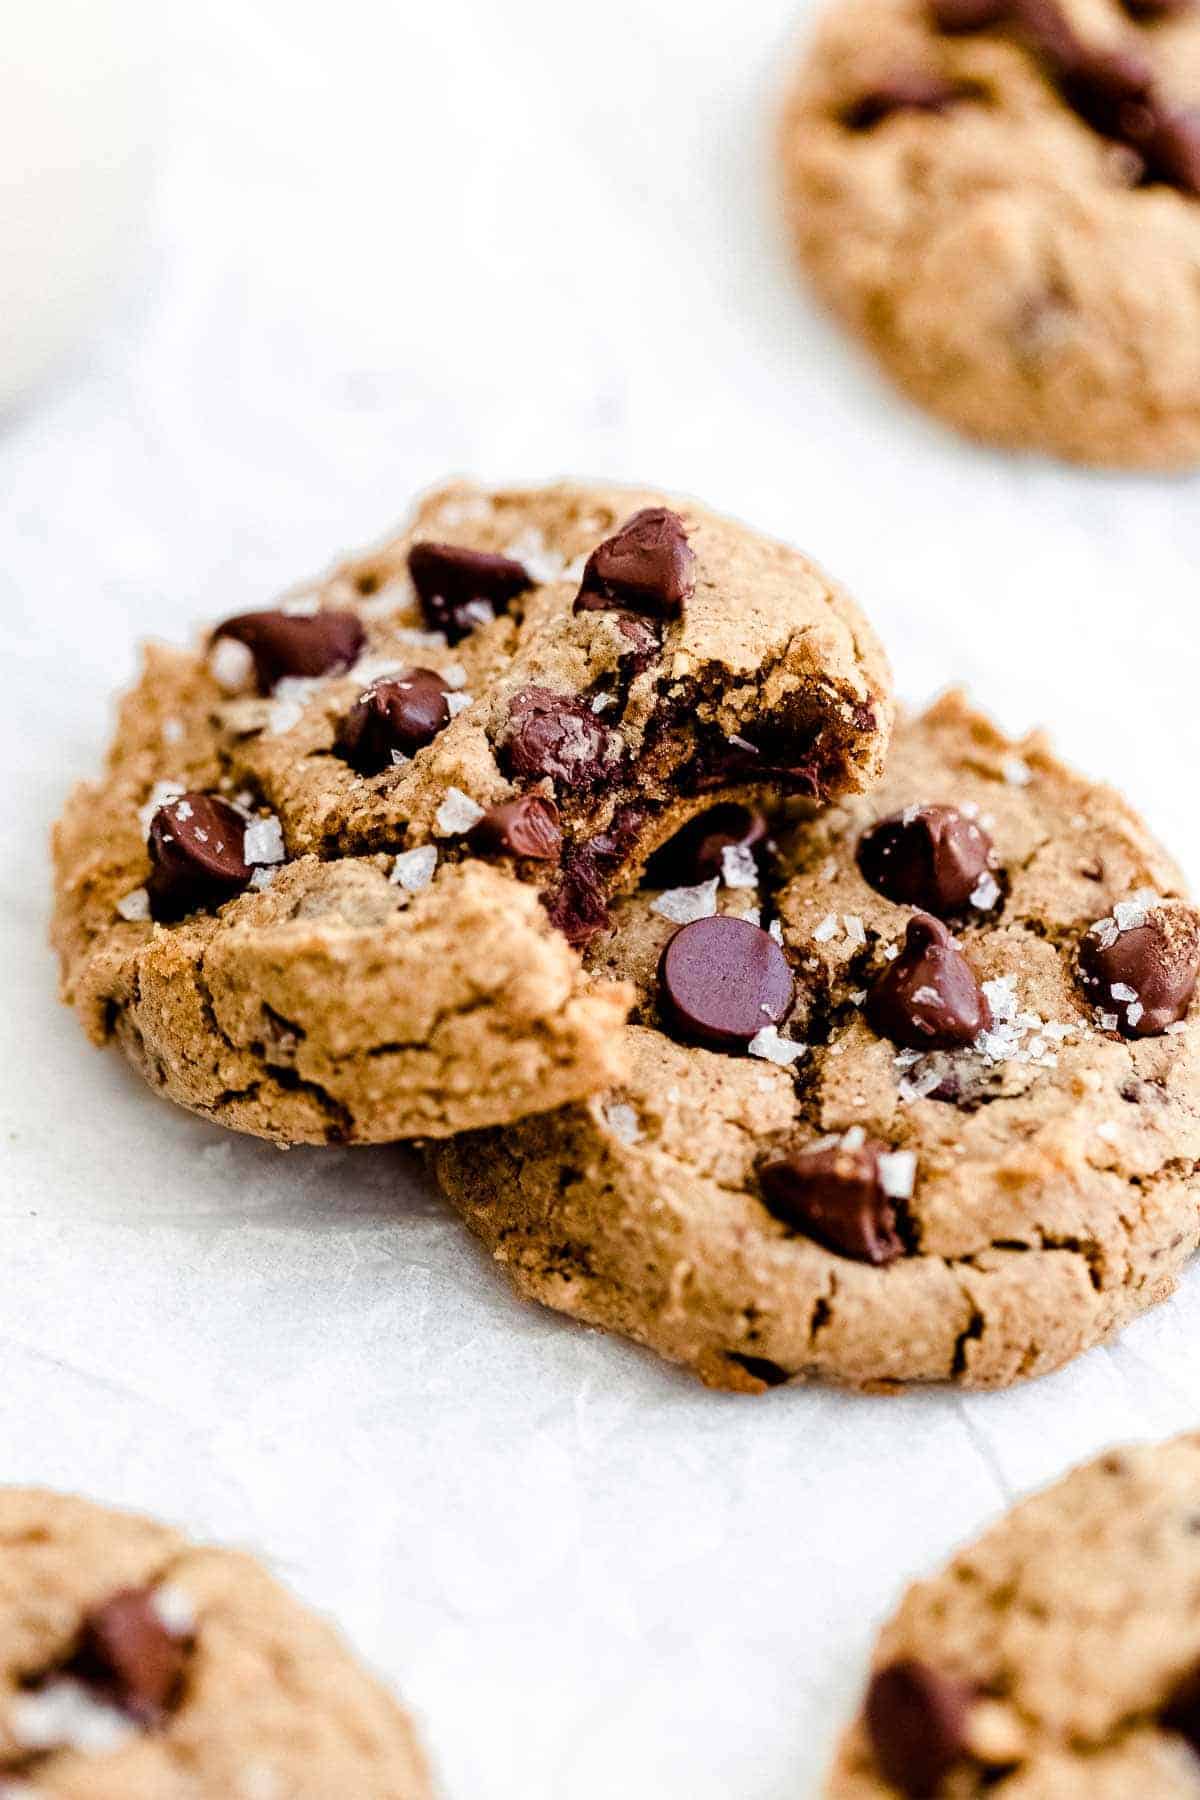 Chickpea Chocolate Chip Cookies Eat With Clarity